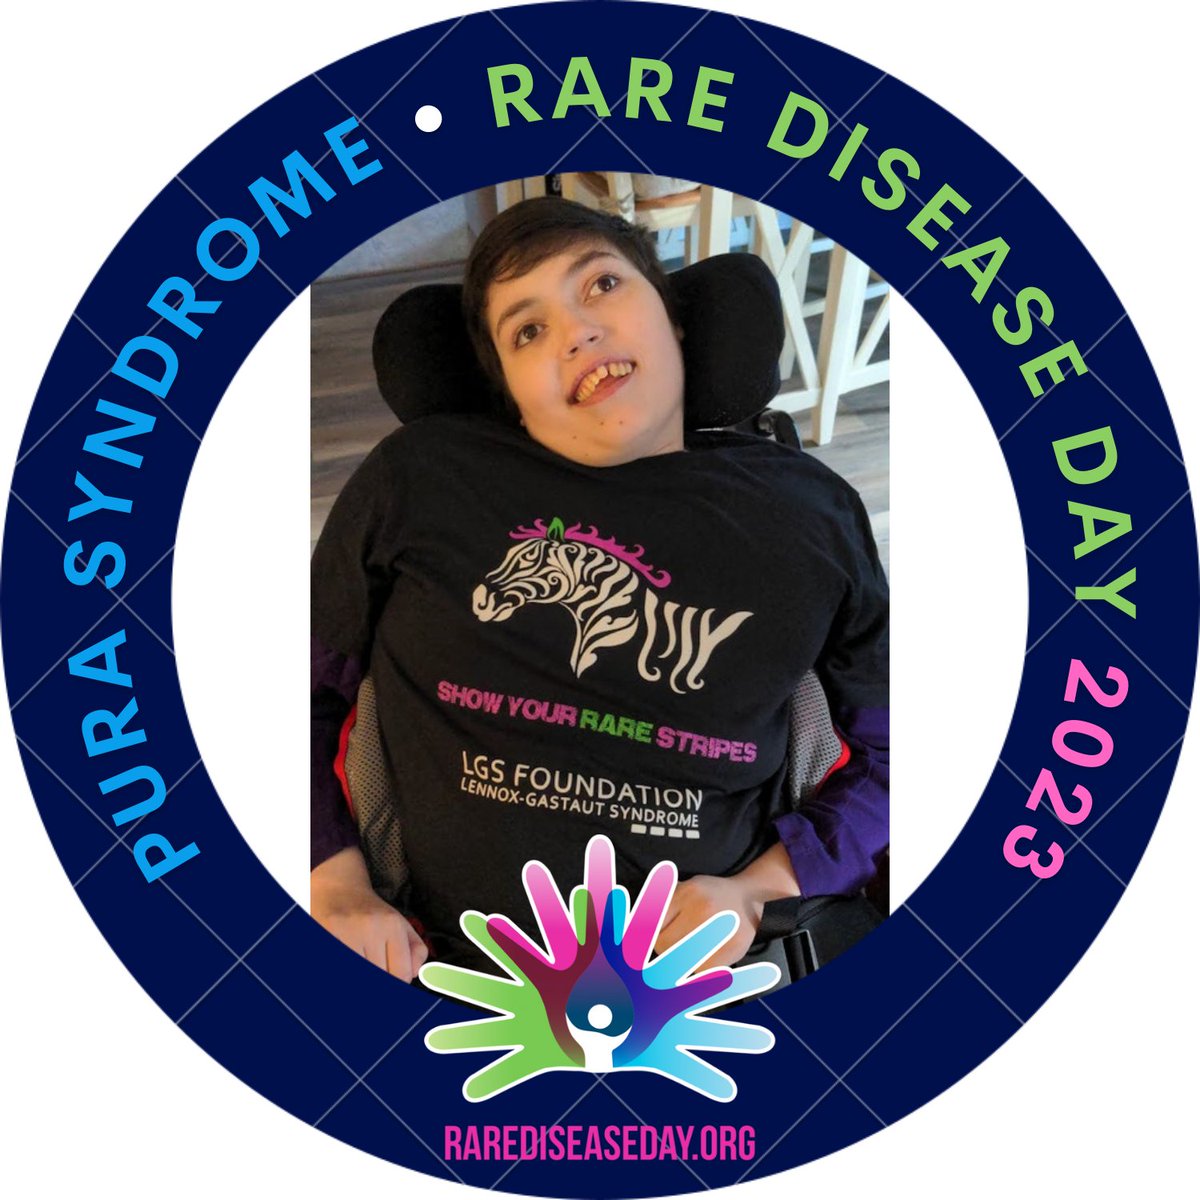 Today is World #RareDiseaseDay- meet our #PURAPerfect daughter, Megan. Meg was in the first group of 11 individuals to be identified as having an anomaly in their PURA gene in 2014. Meg also has a rare epilepsy known as #LennoxGastautSyndrome, so we say she is “doubly rare”! 💜💚